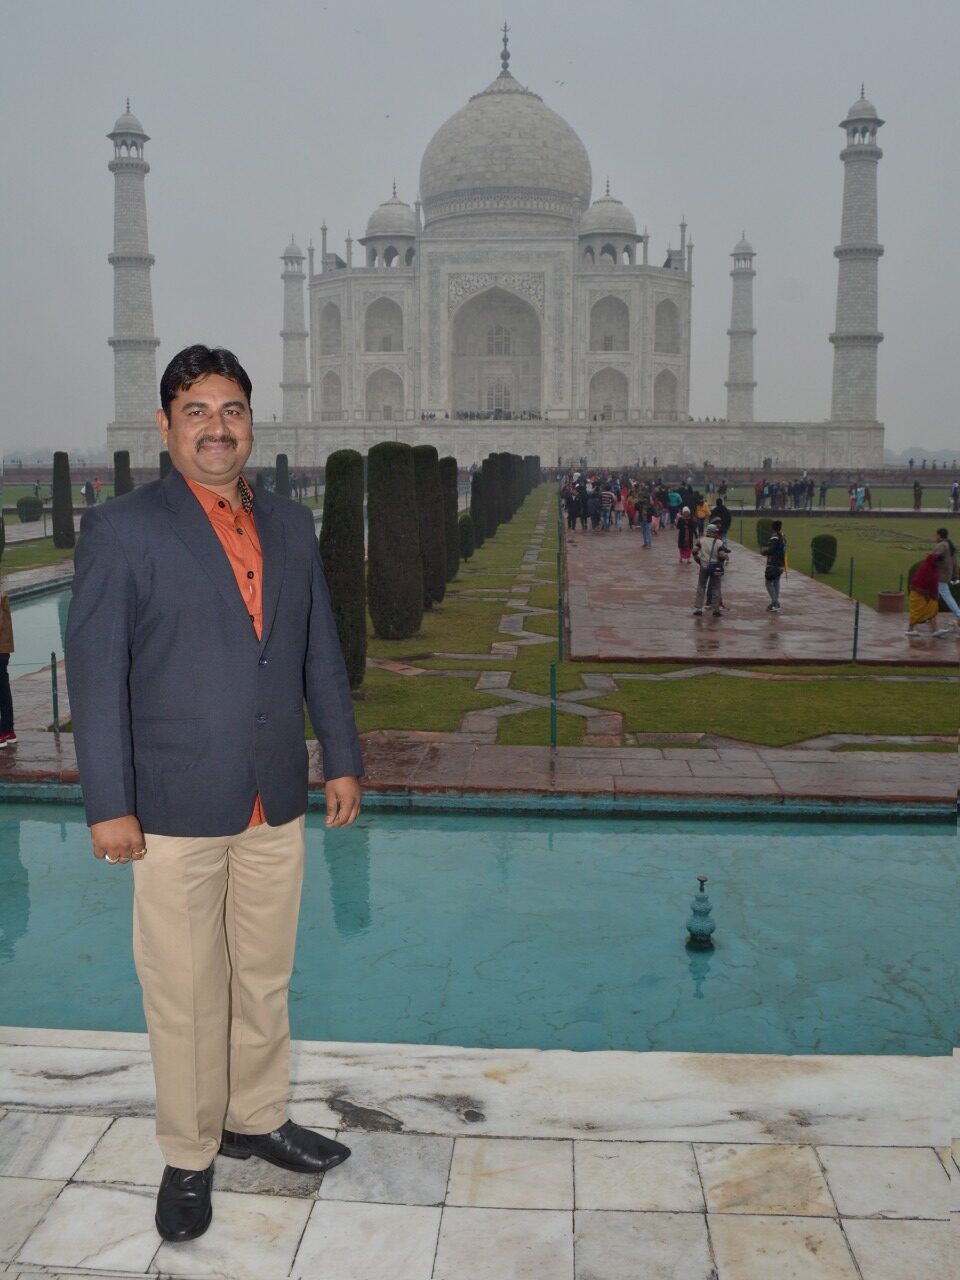 jogendar bhati, founder of india cab service, jogendra bhati, hire private car and driver in india, private car and driver in delhi, best hotels in india, book luxury hotels in india, Luxury bus rental in india, best tour opretor in india, car rental in india, hire car and driver in india cab service